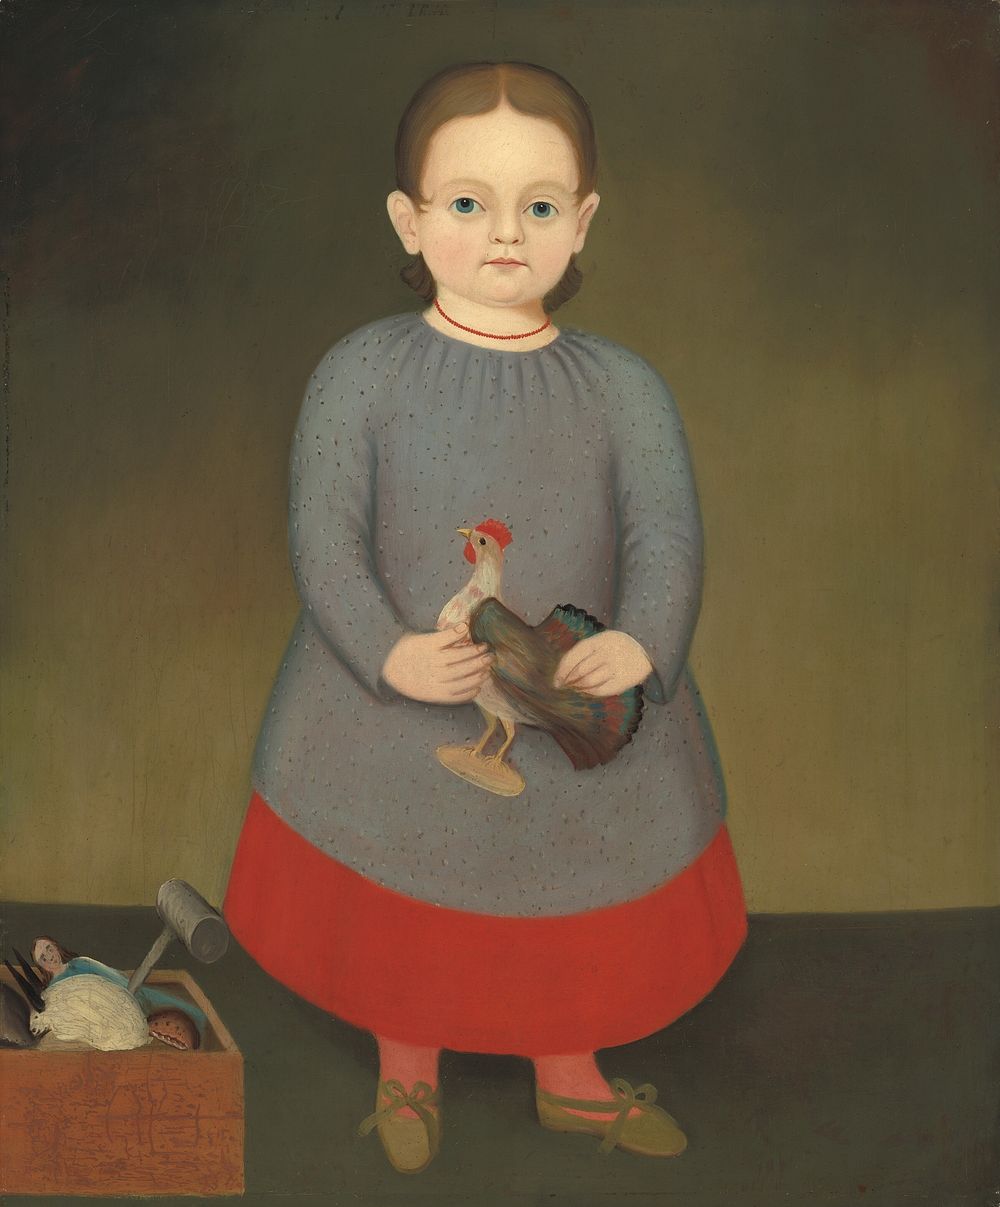 Girl with Toy Rooster (c. 1840).  